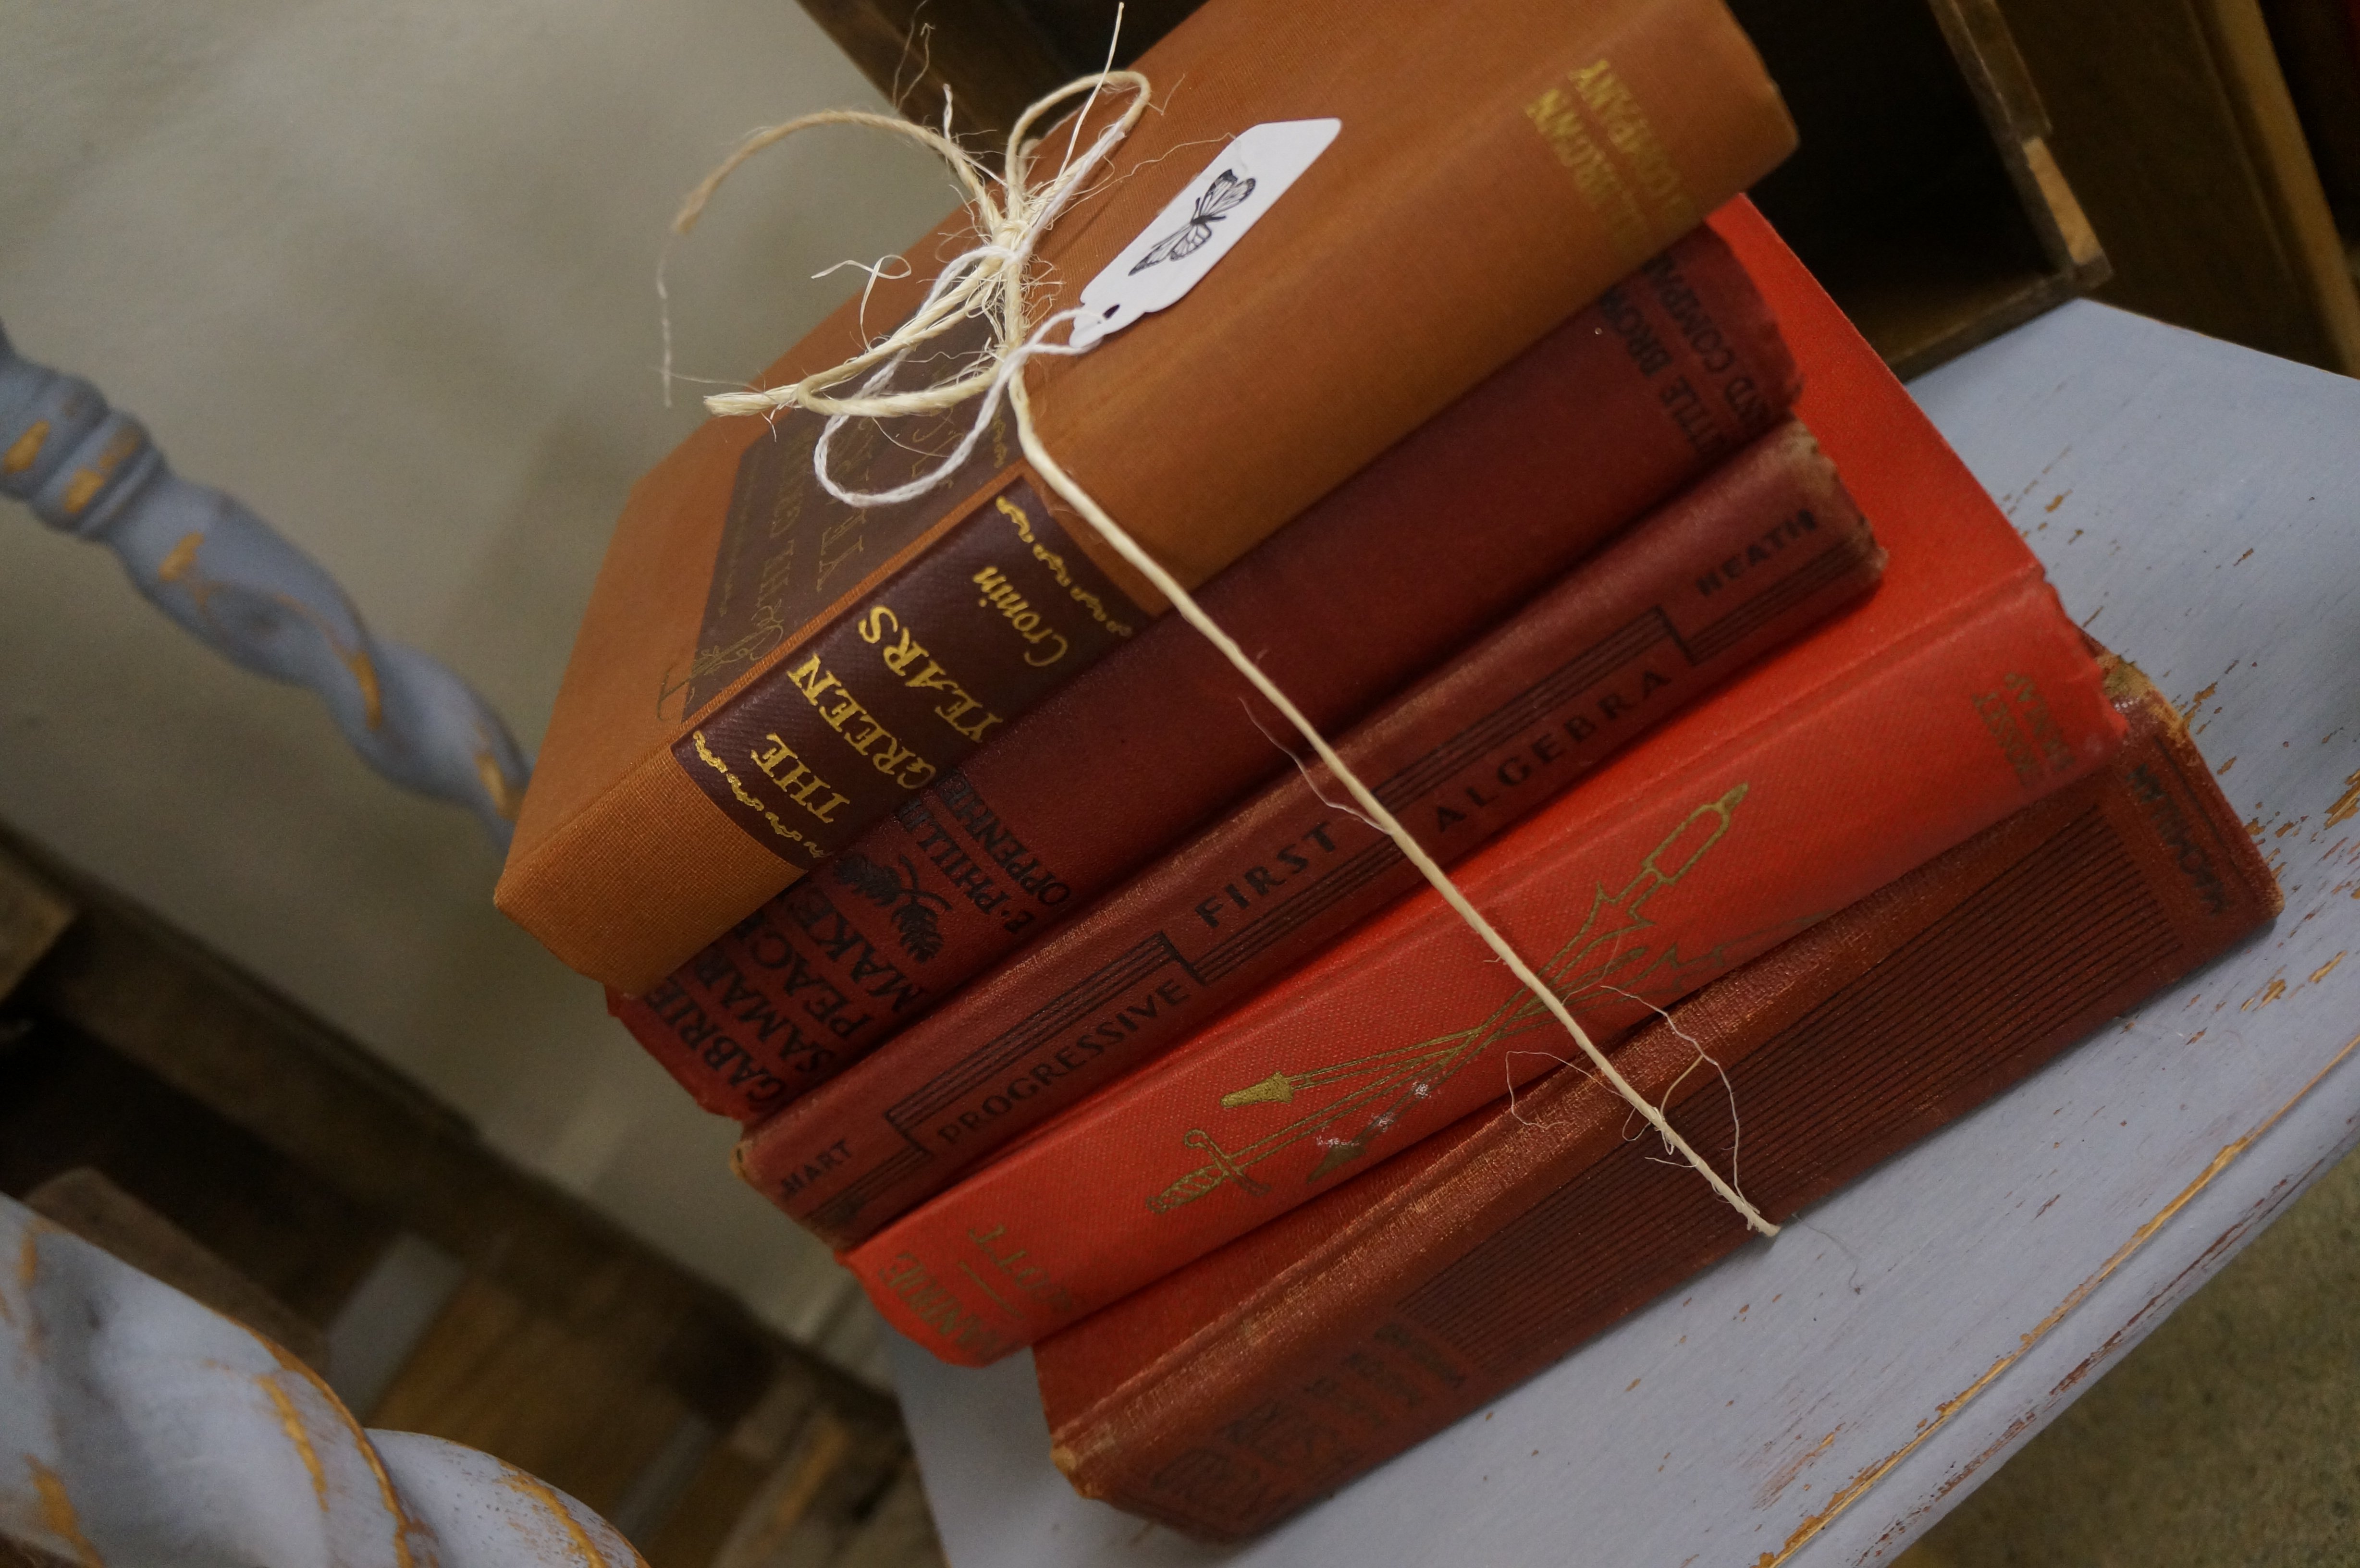 Decorating With Vintage Books